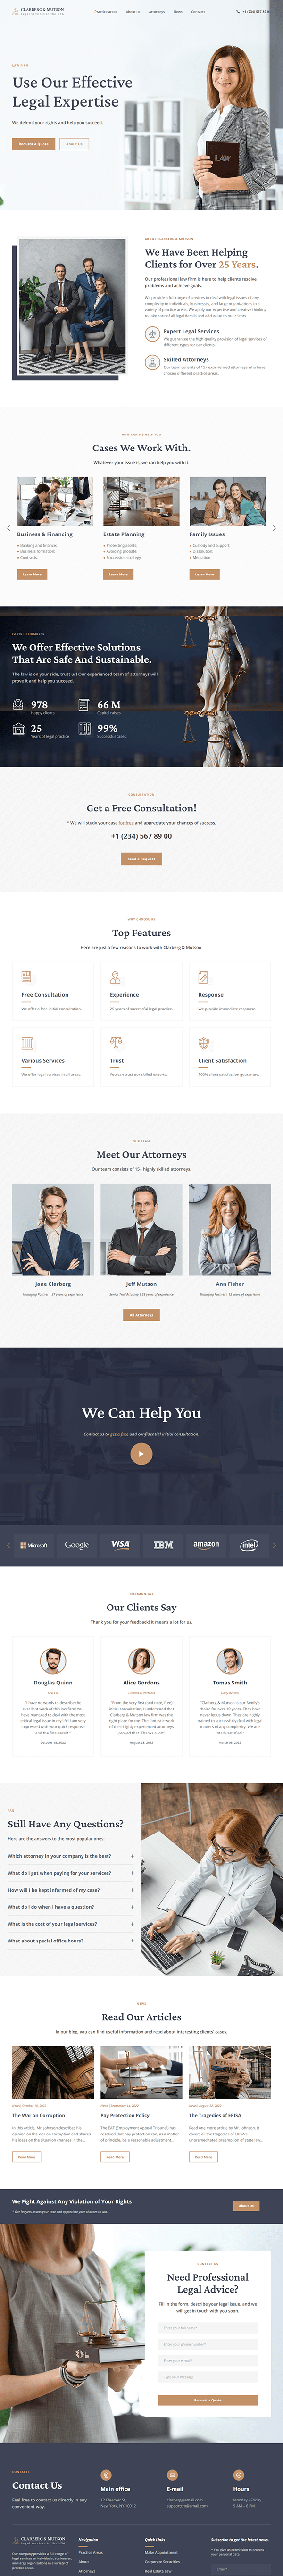 Lawyer or Law Firm Website